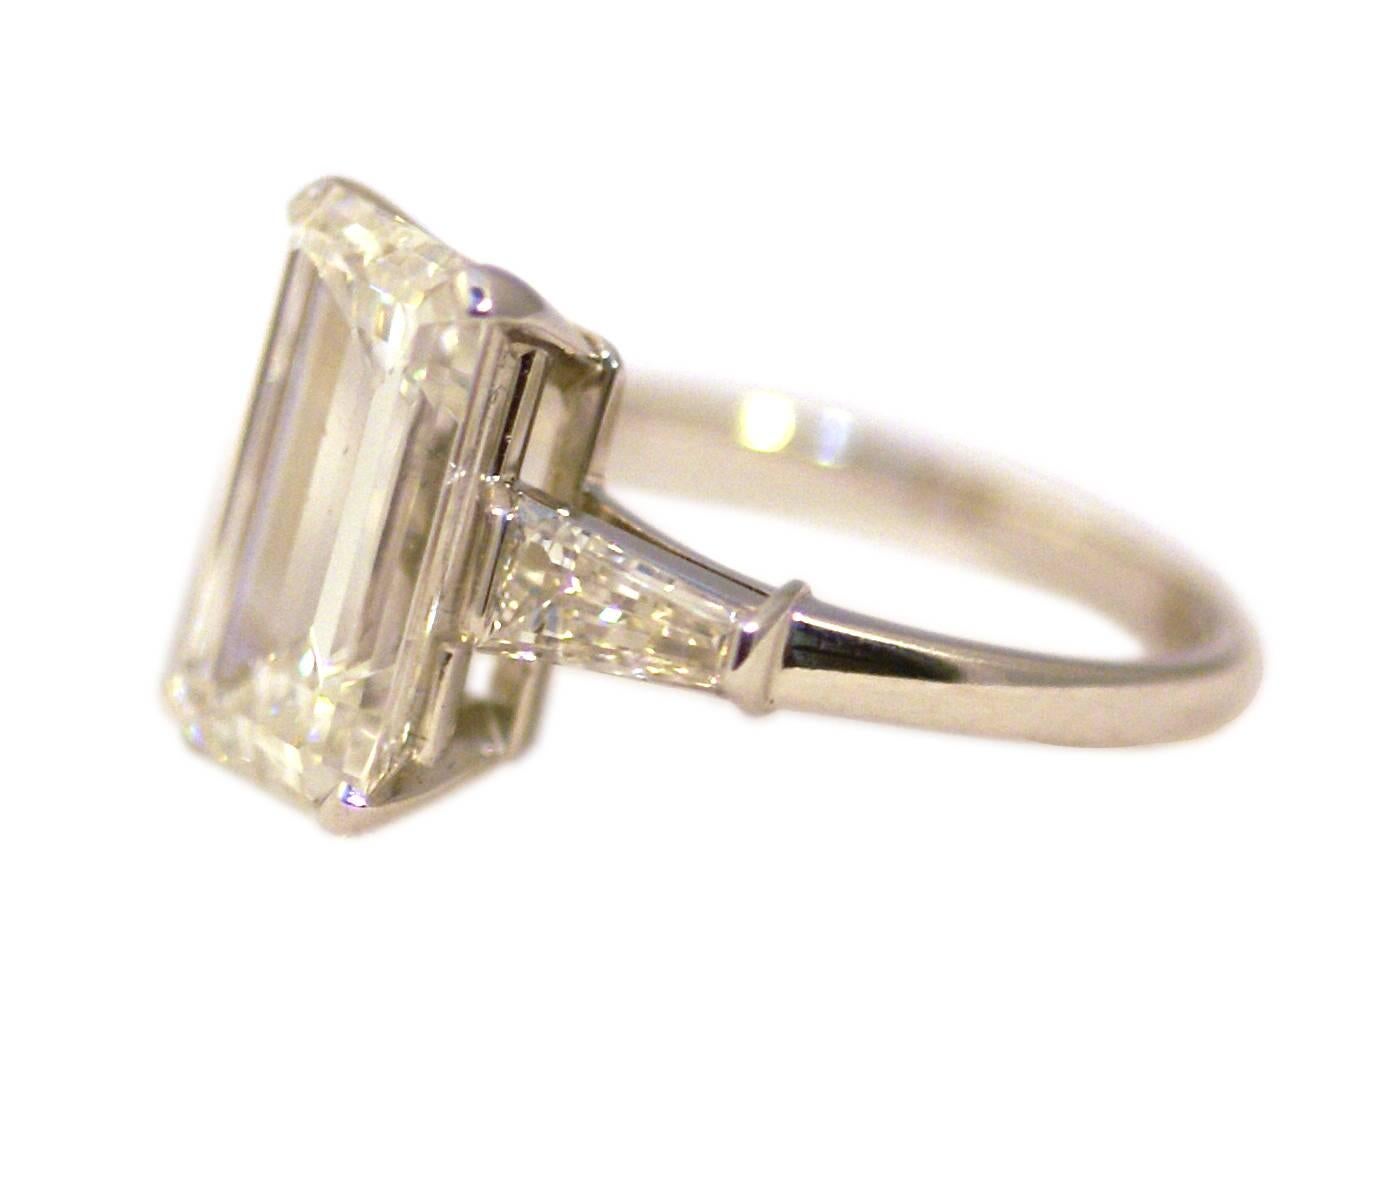 A 3.85 carat emerald cut, sided by two tapered baguettes, by Bulgari, circa 1980. G color, VVS1 clarity. 